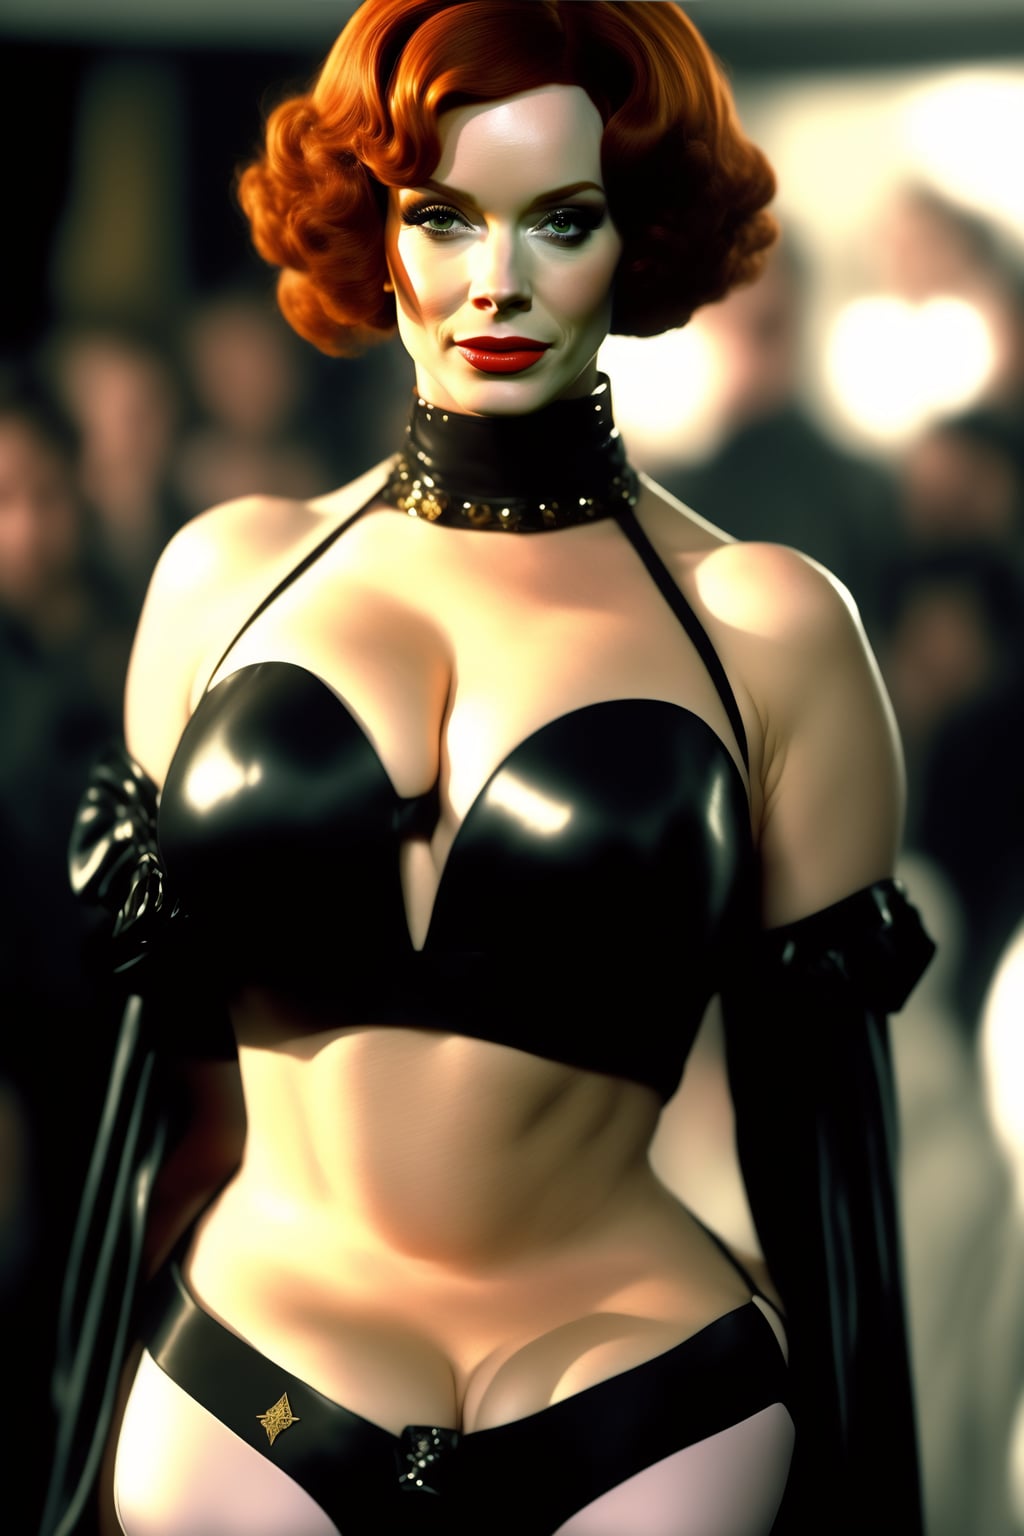 solidarity singer Frank Lexica - portrait shot of christina hendricks in cyberpunk clothed